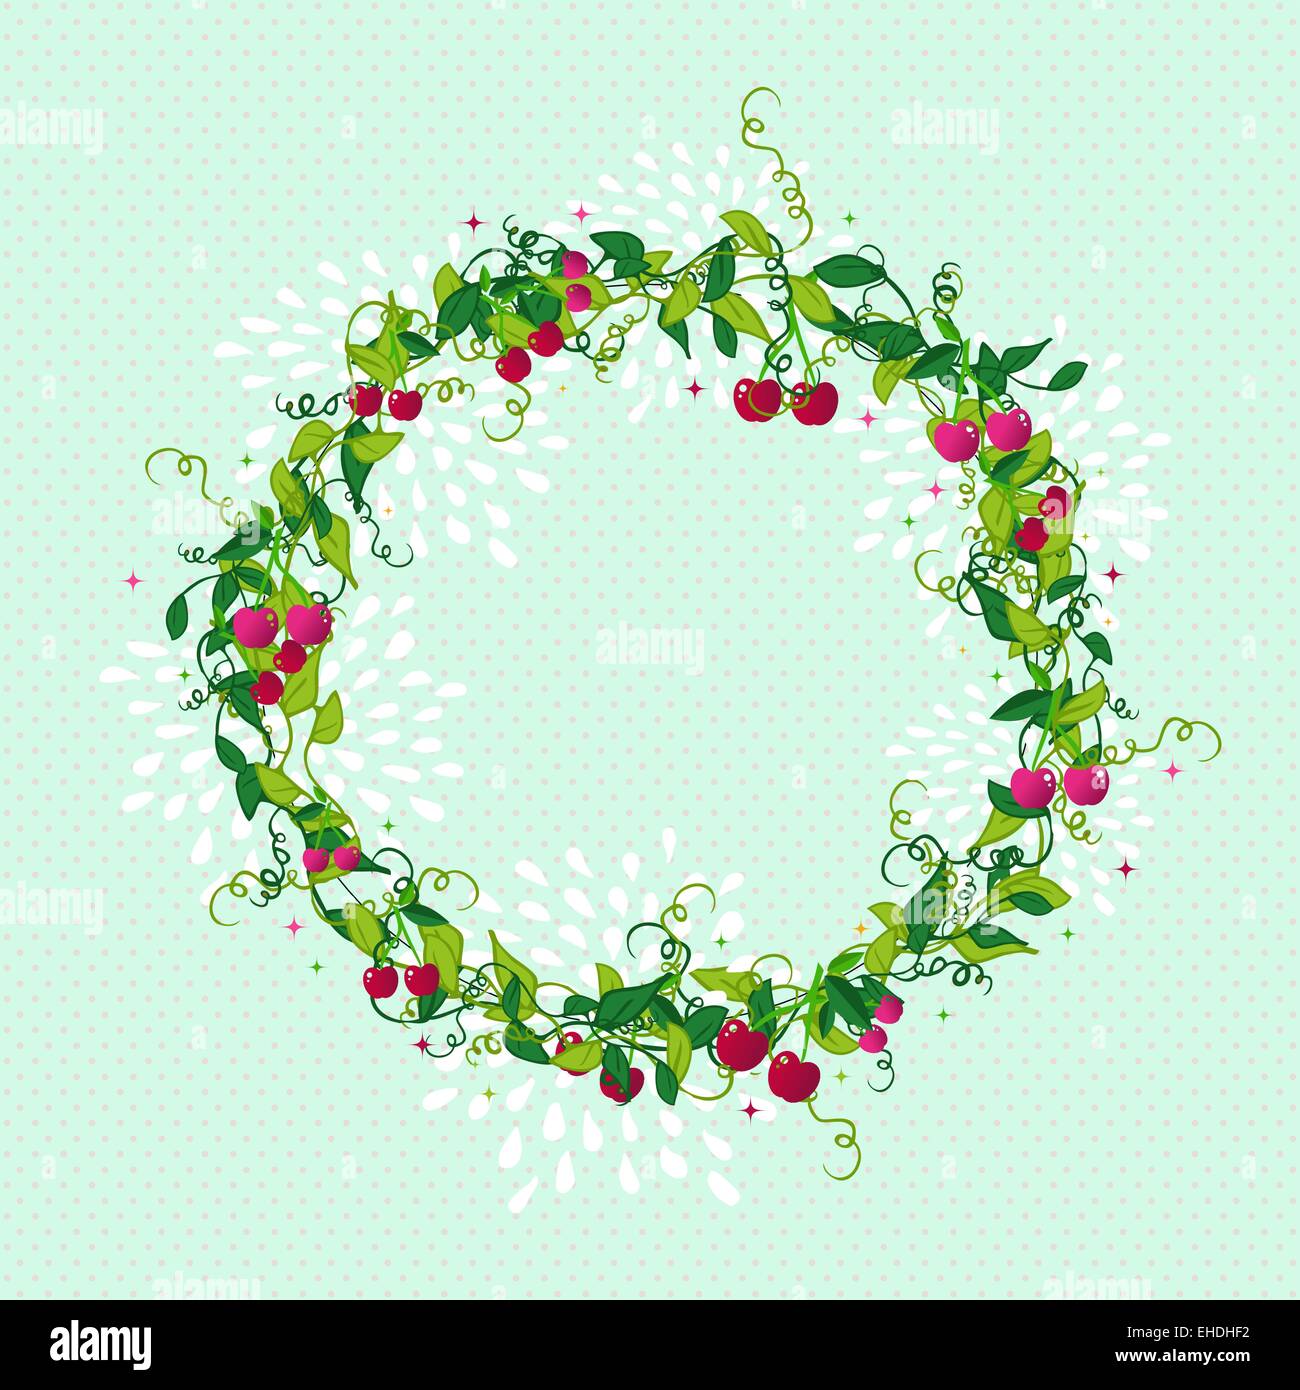 Cherry fruit food wreath cute design illustration. Ideal for restaurant menu, book cover and print. EPS10 vector file. Stock Vector